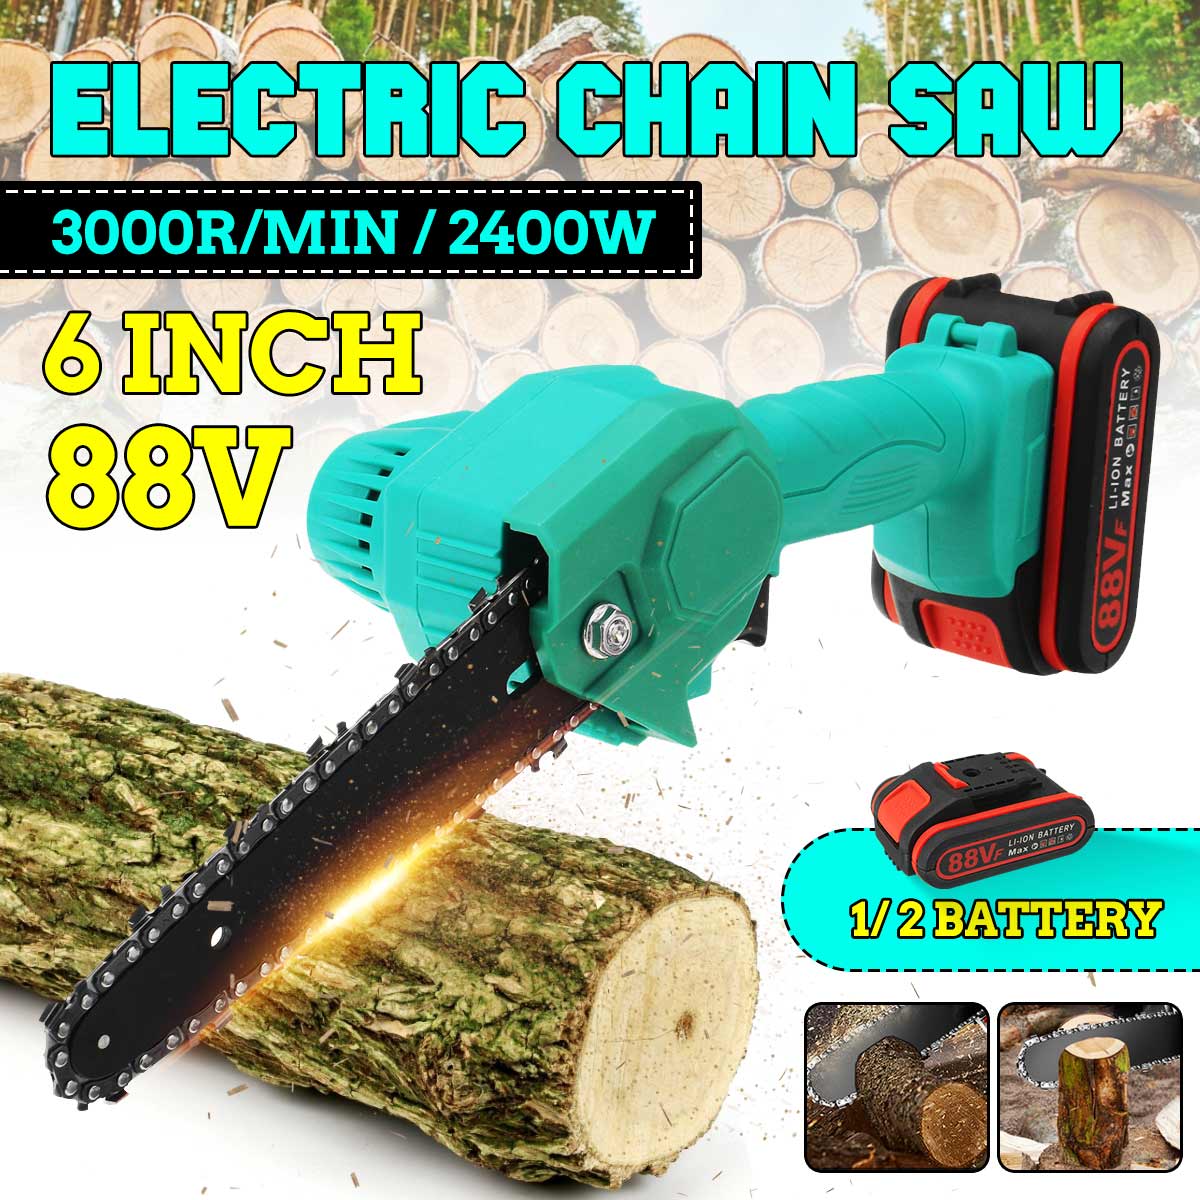 21V-Portable-Electric-Pruning-Saw-Rechargeable-Woodworking-Electric-Chain-Saw-W-12pcs-Battery-1807552-1